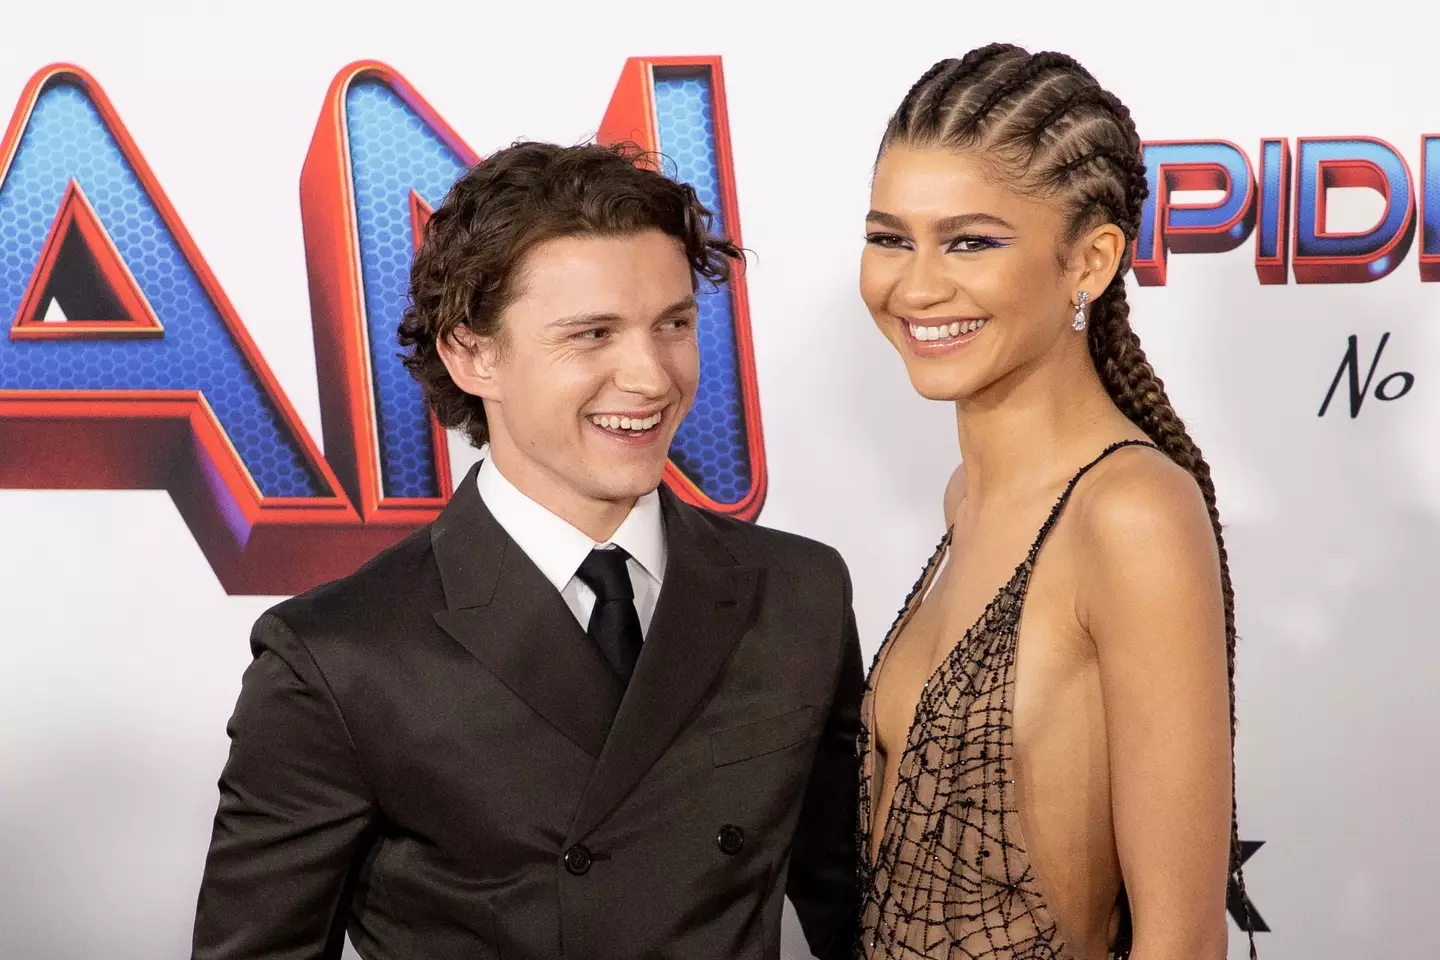 Zendaya swerved the question to focus on Tom Holland.